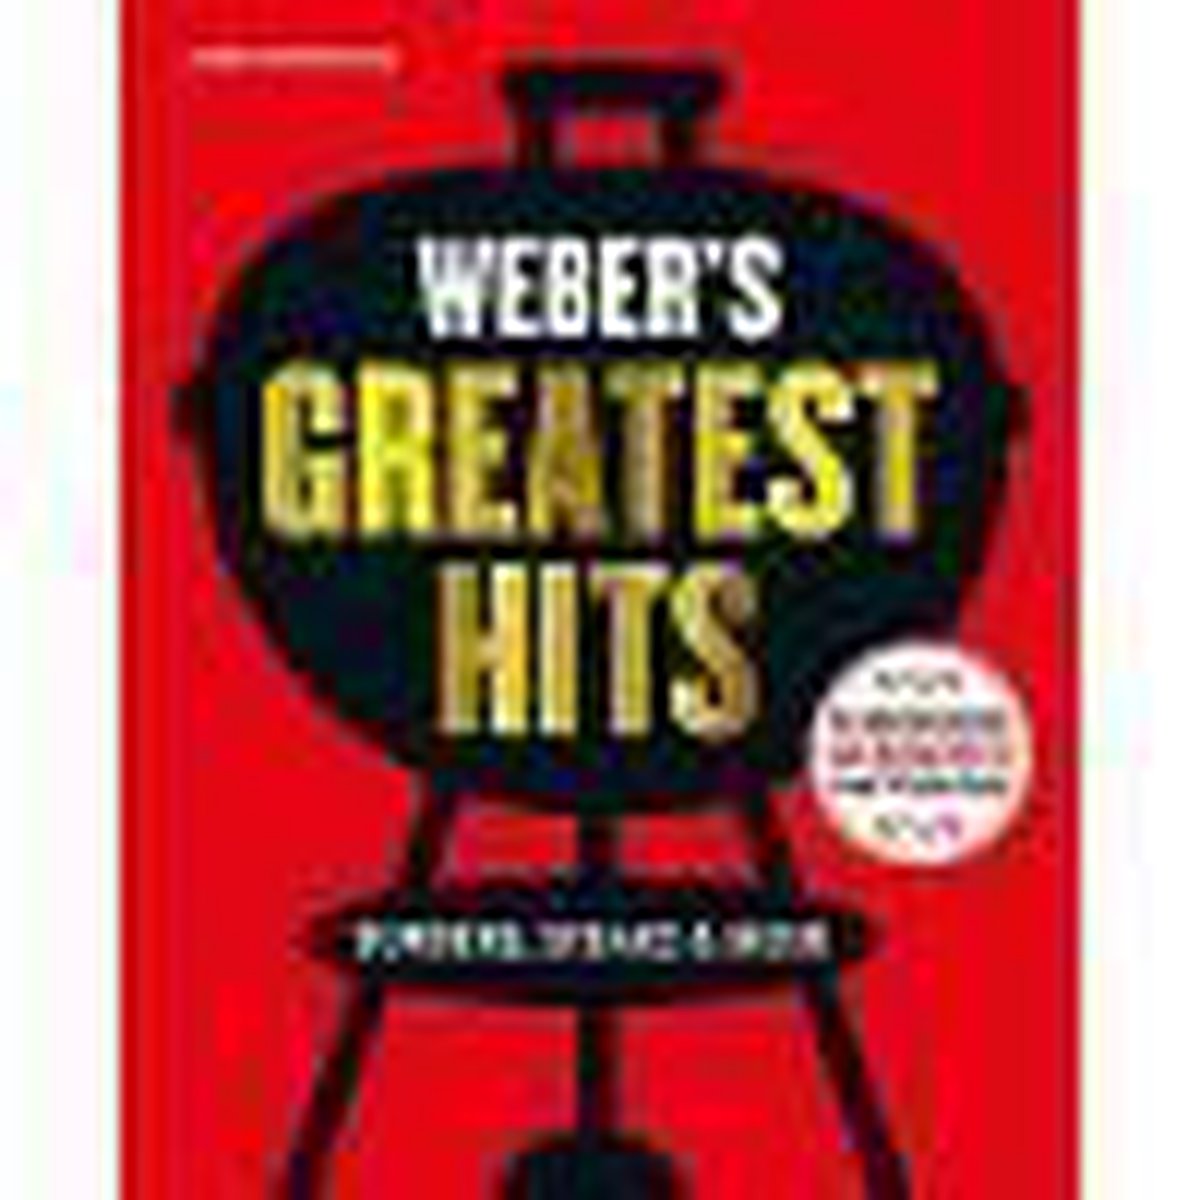 Weber's greatest hits